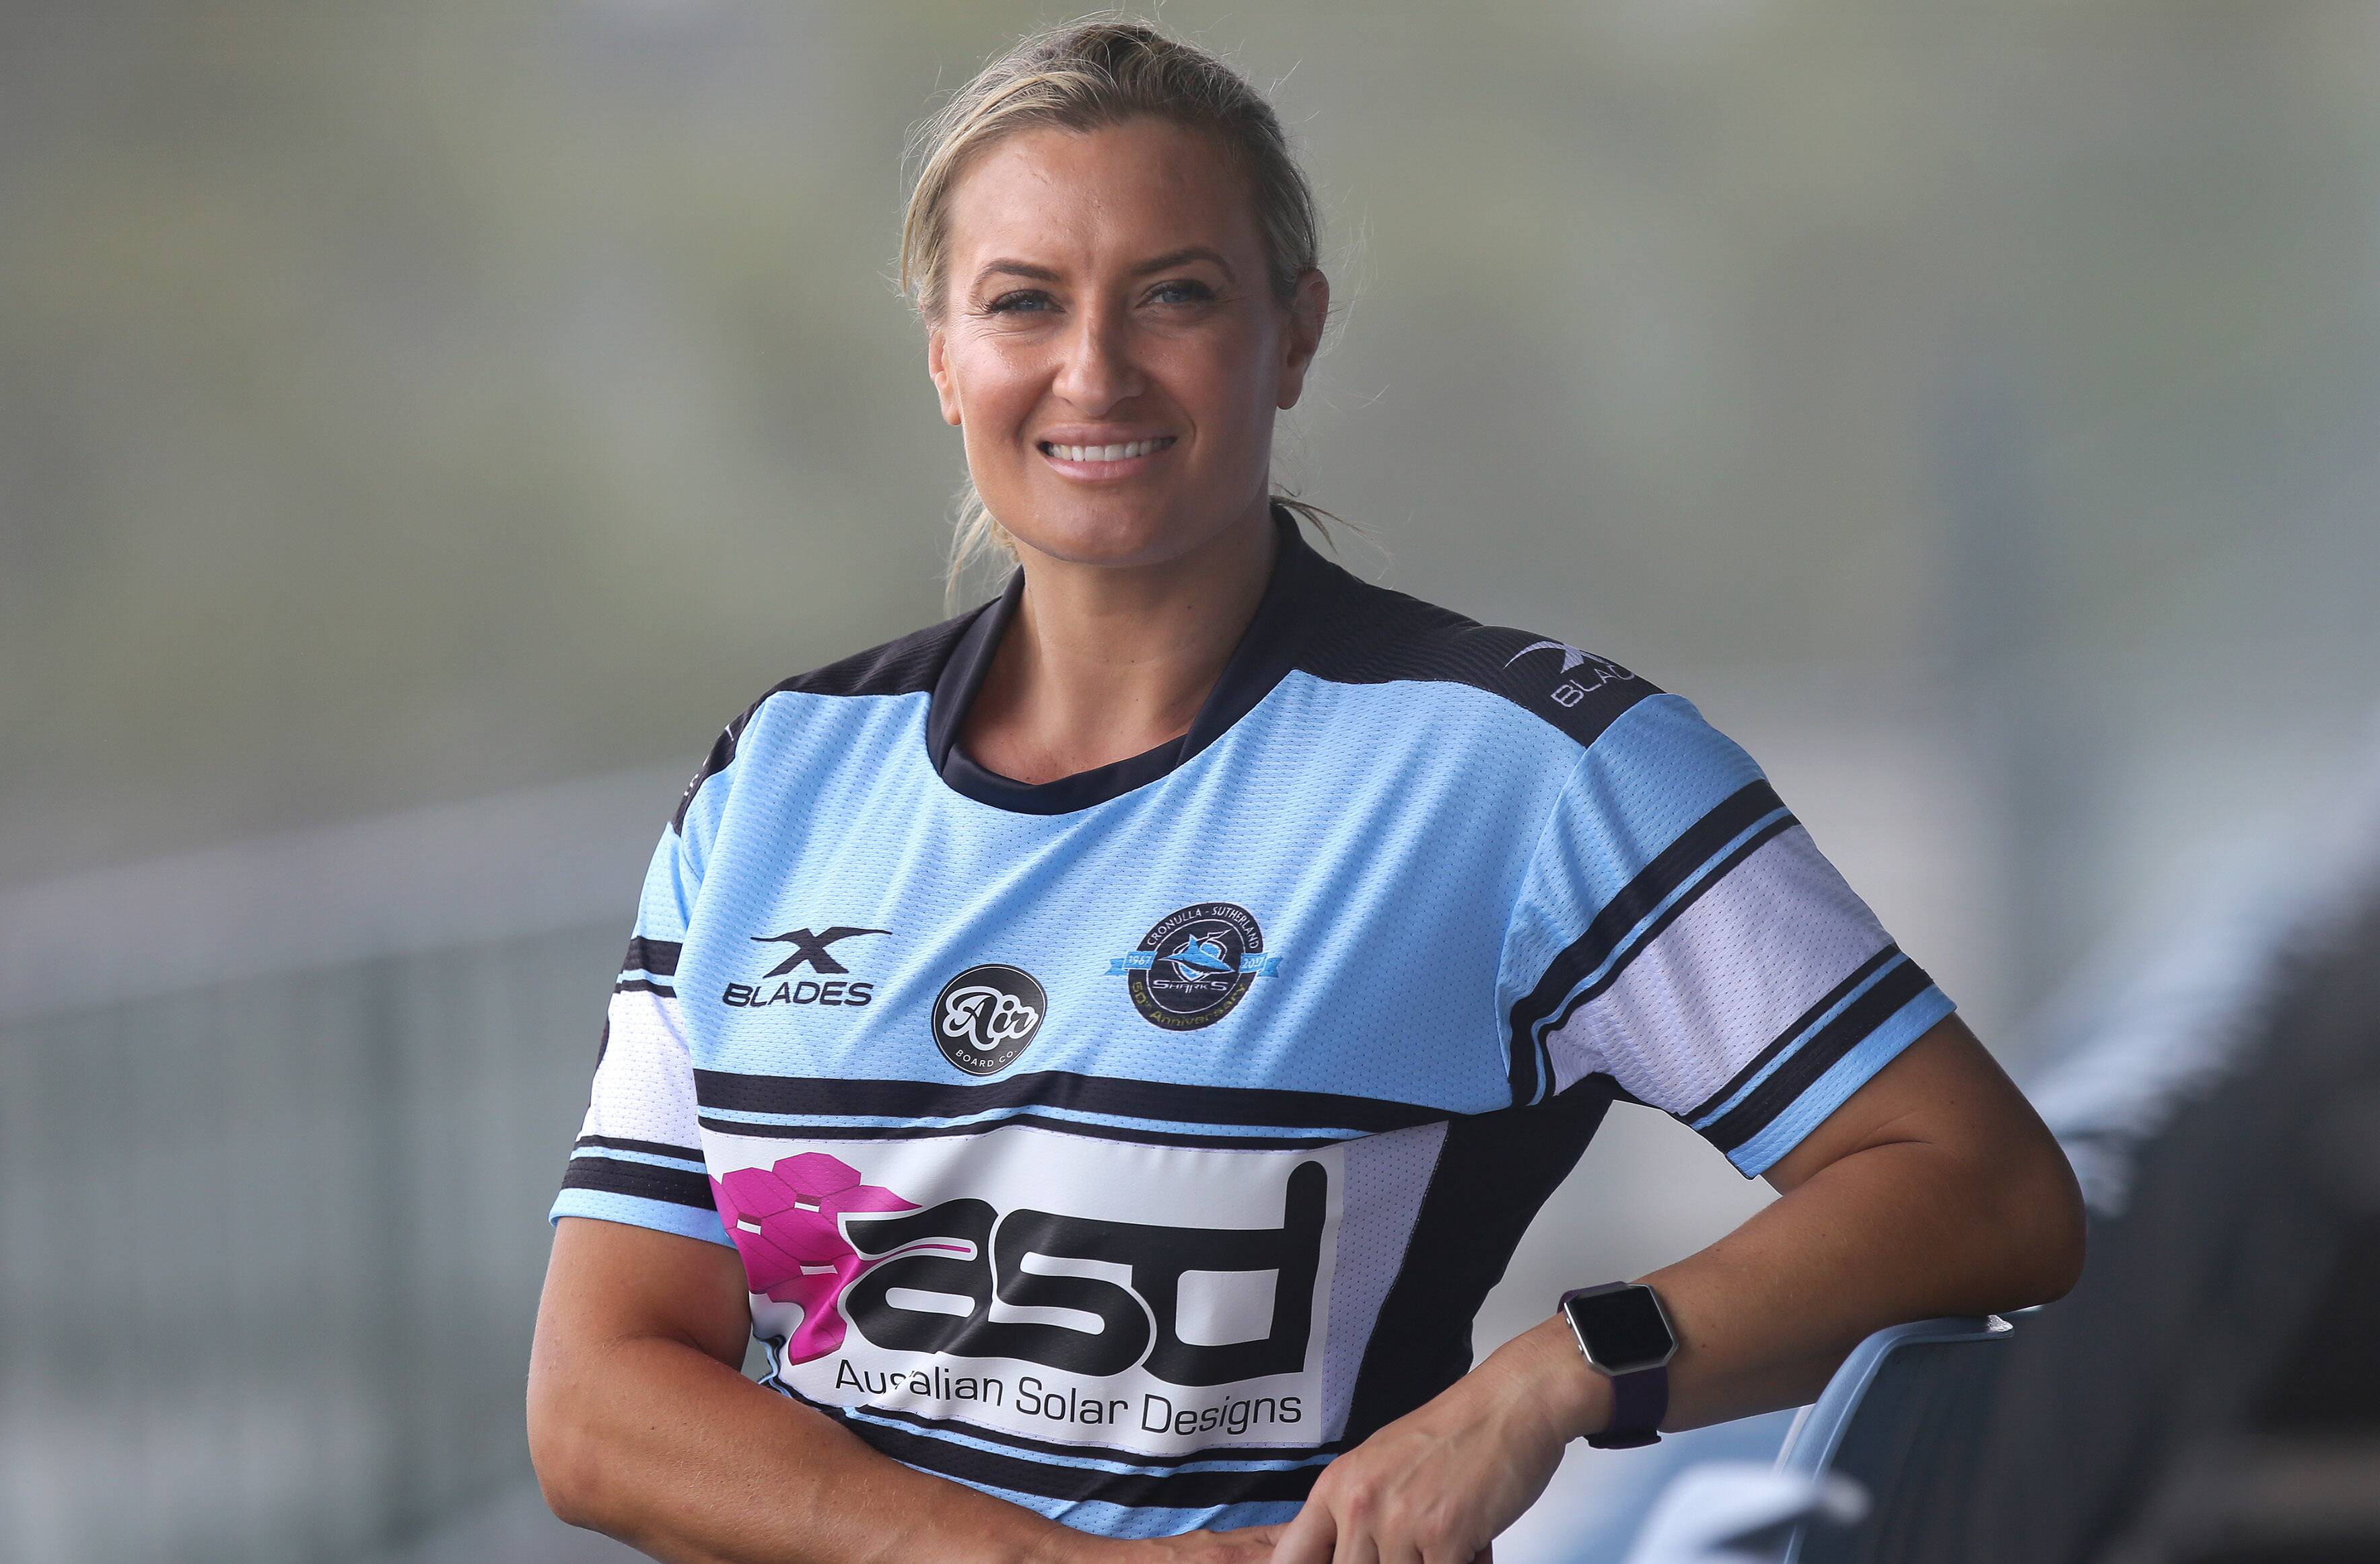 2021 Cronulla Sutherland Sharks Rugby Home Jersey Shirt